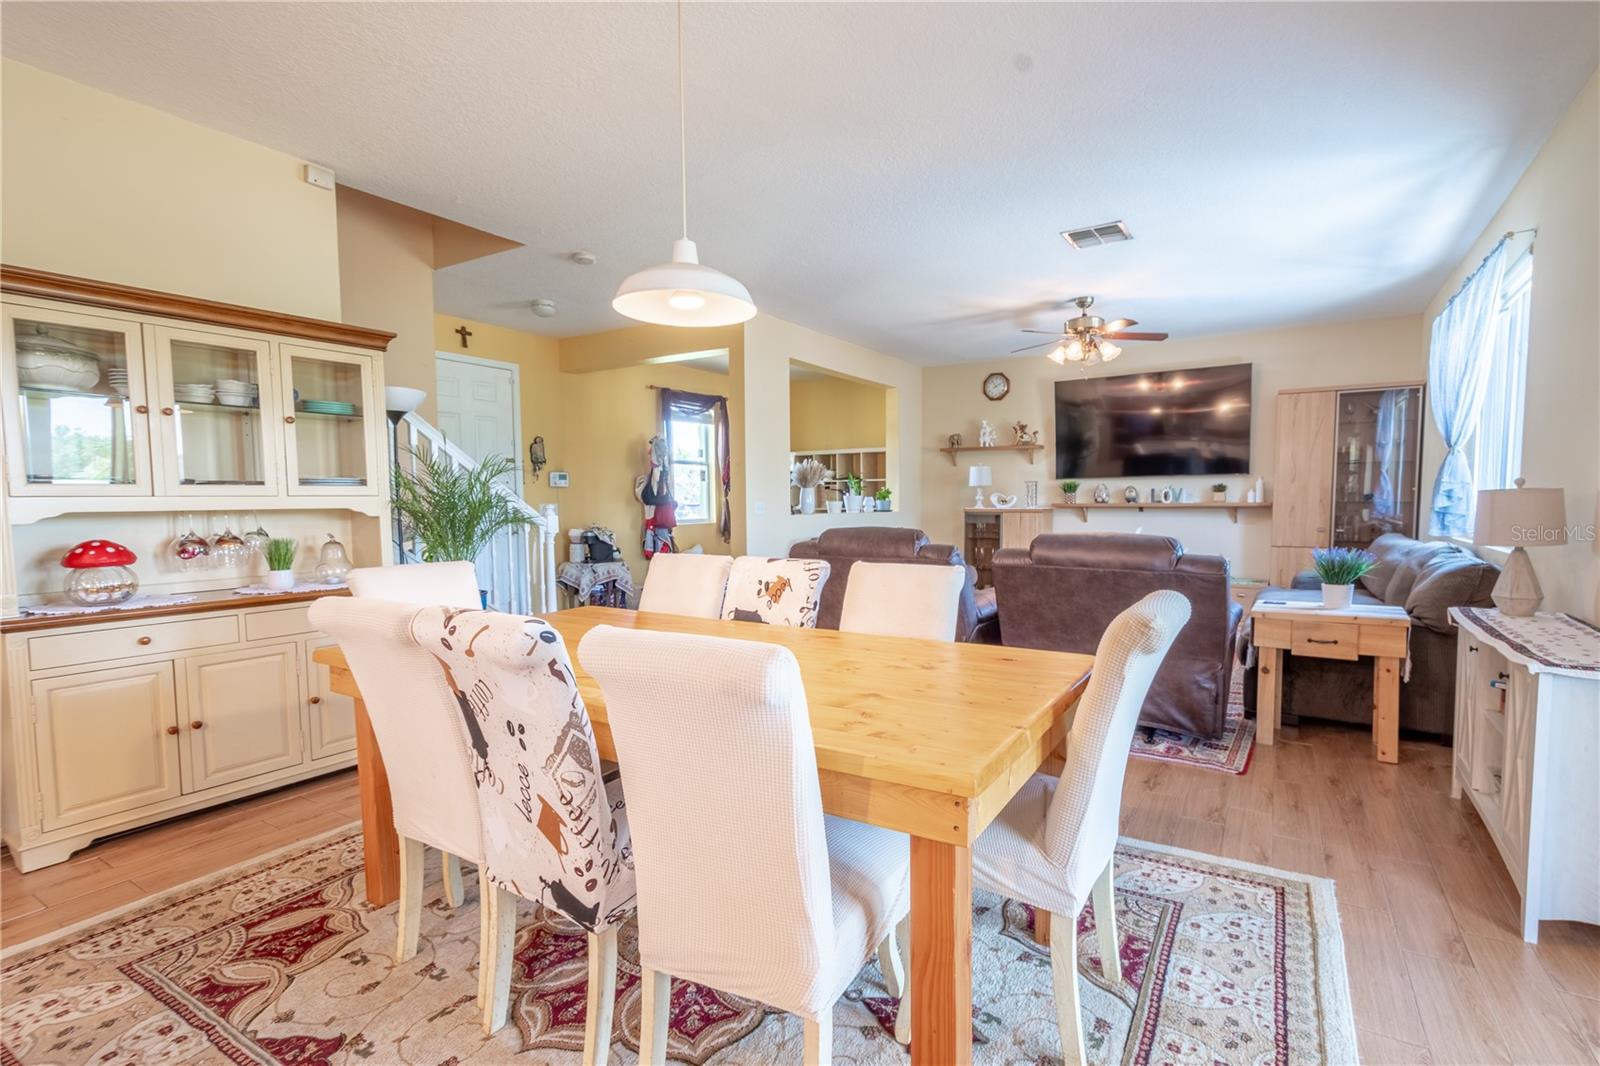 The 10' x 16' dining room is open to the kitchen and dining rooms for ease of entertaining.